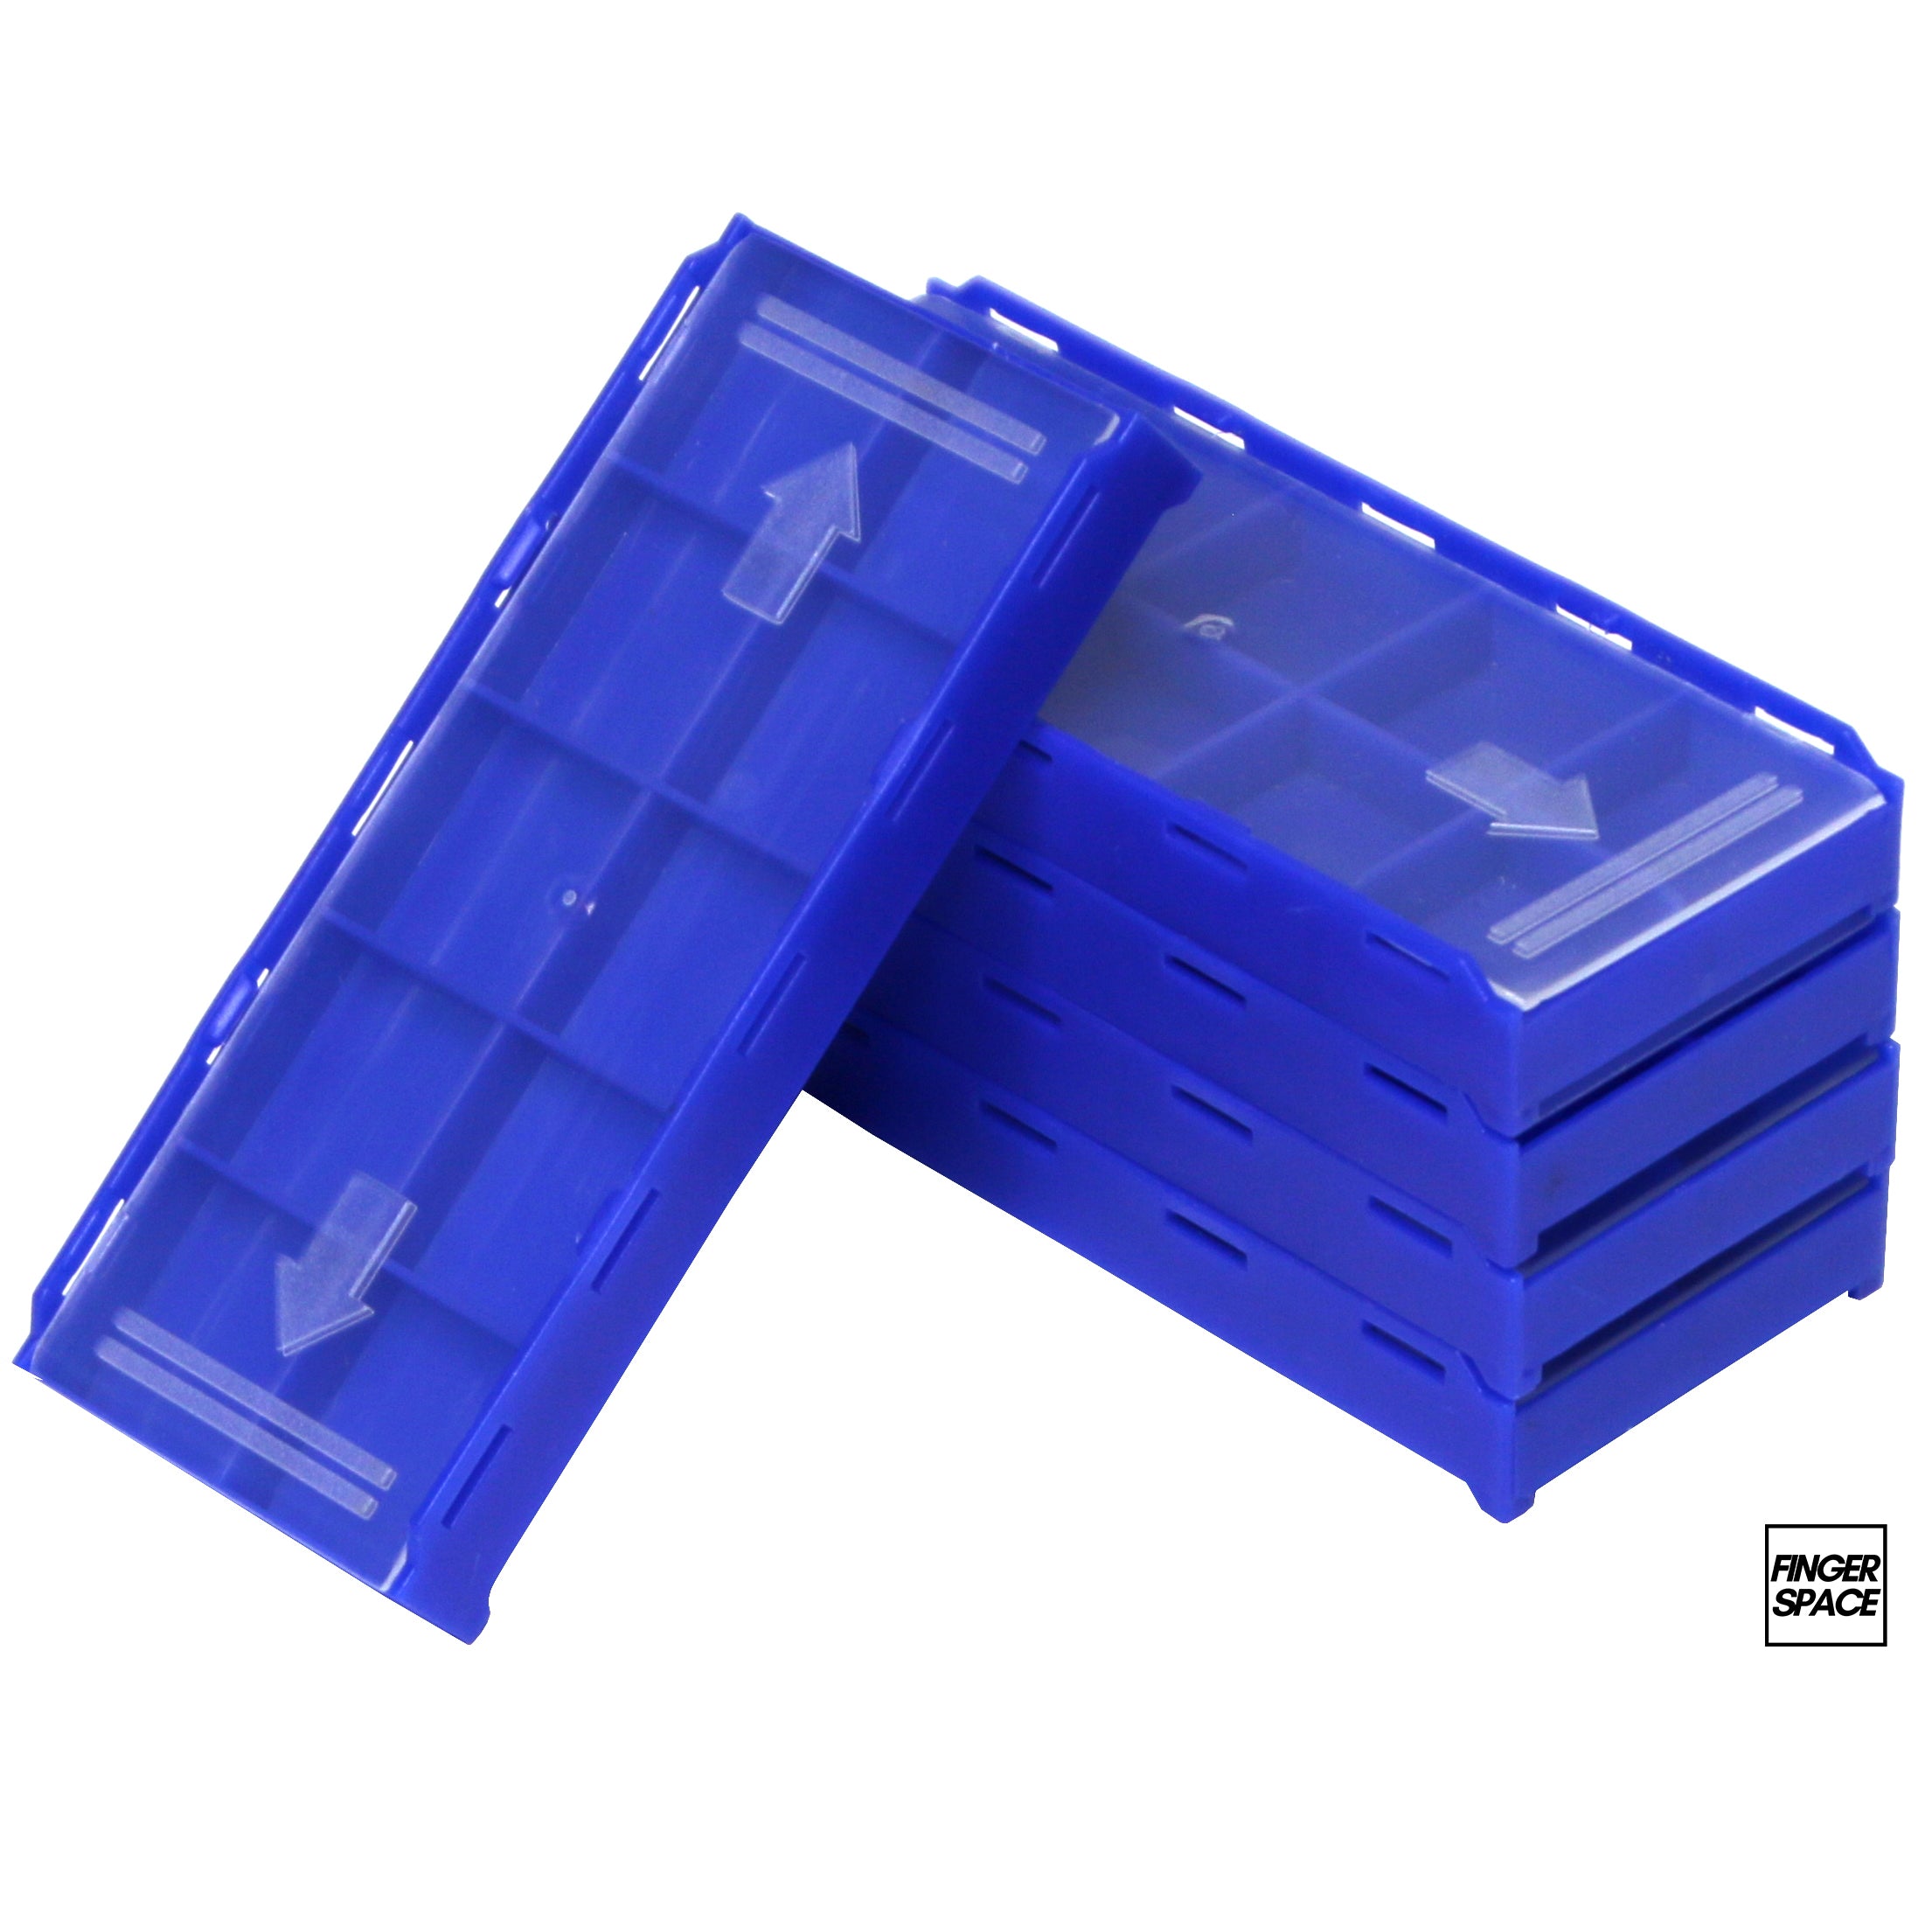 5-Pack of Blue "Space Cases" - Modular Stacking Storage Boxes